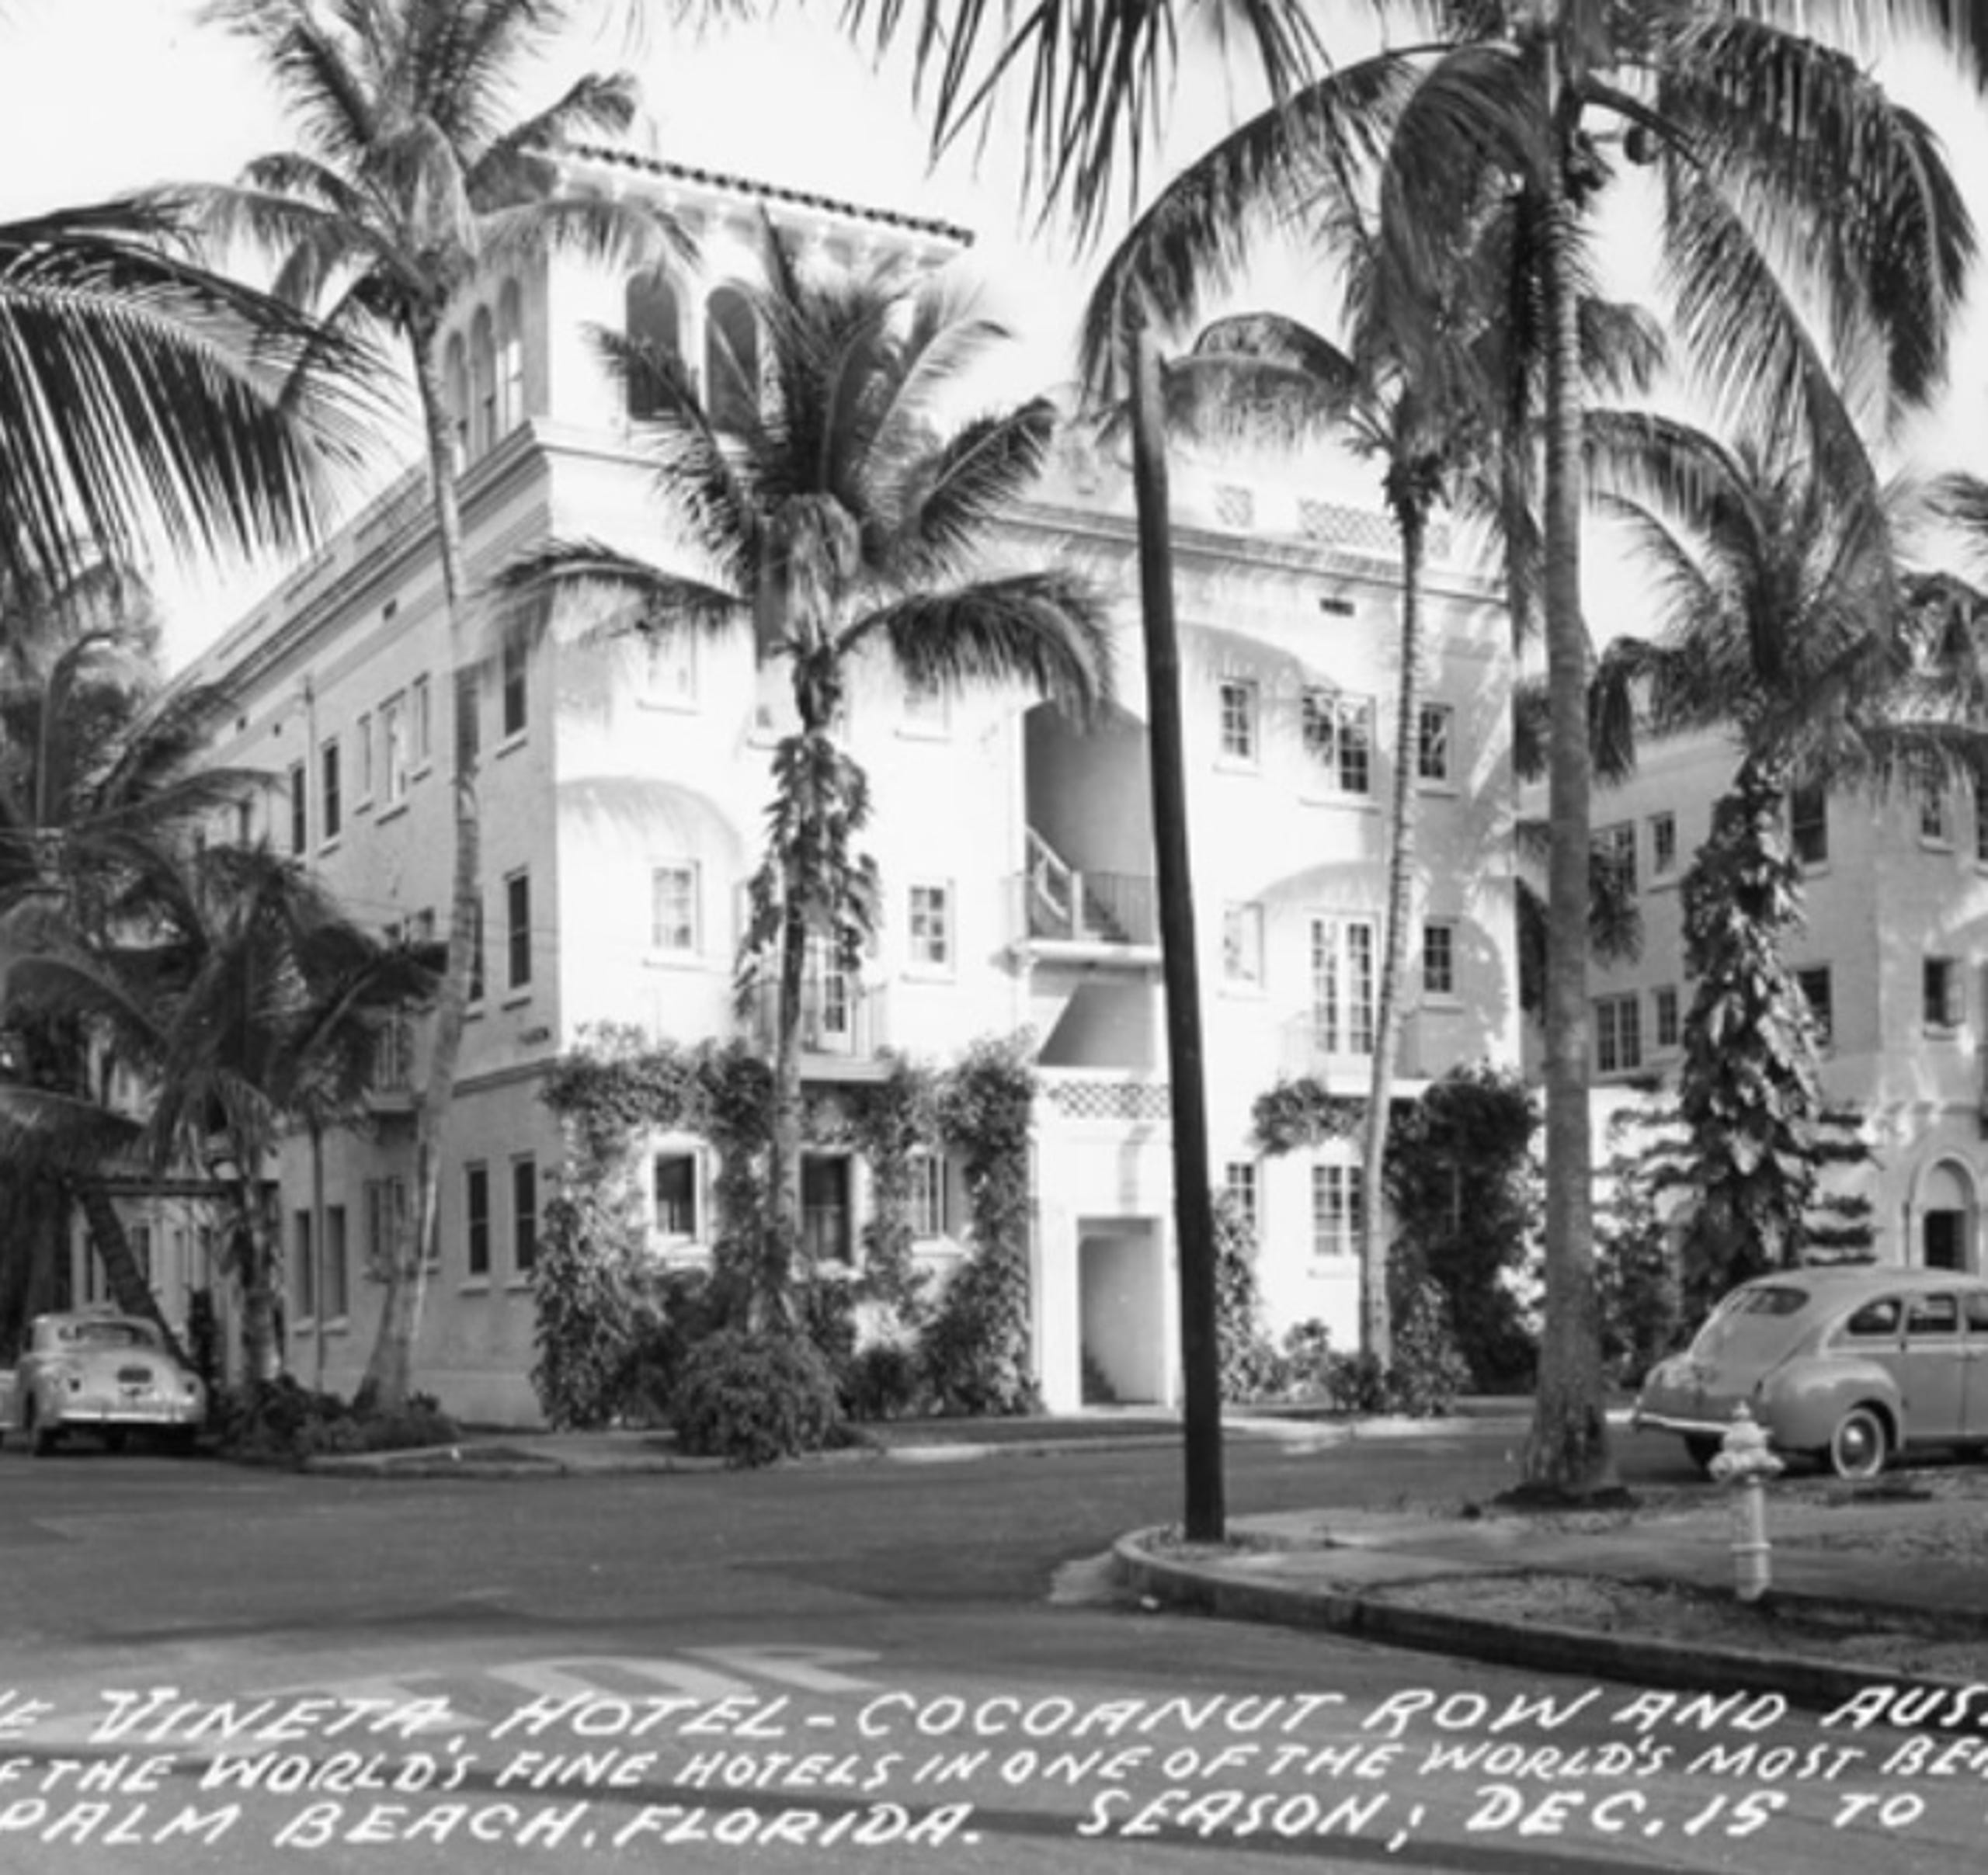 For decades, the Palm Beach hotel today known as the Chesterfield operated as The Vineta, seen here in an undated photograph.